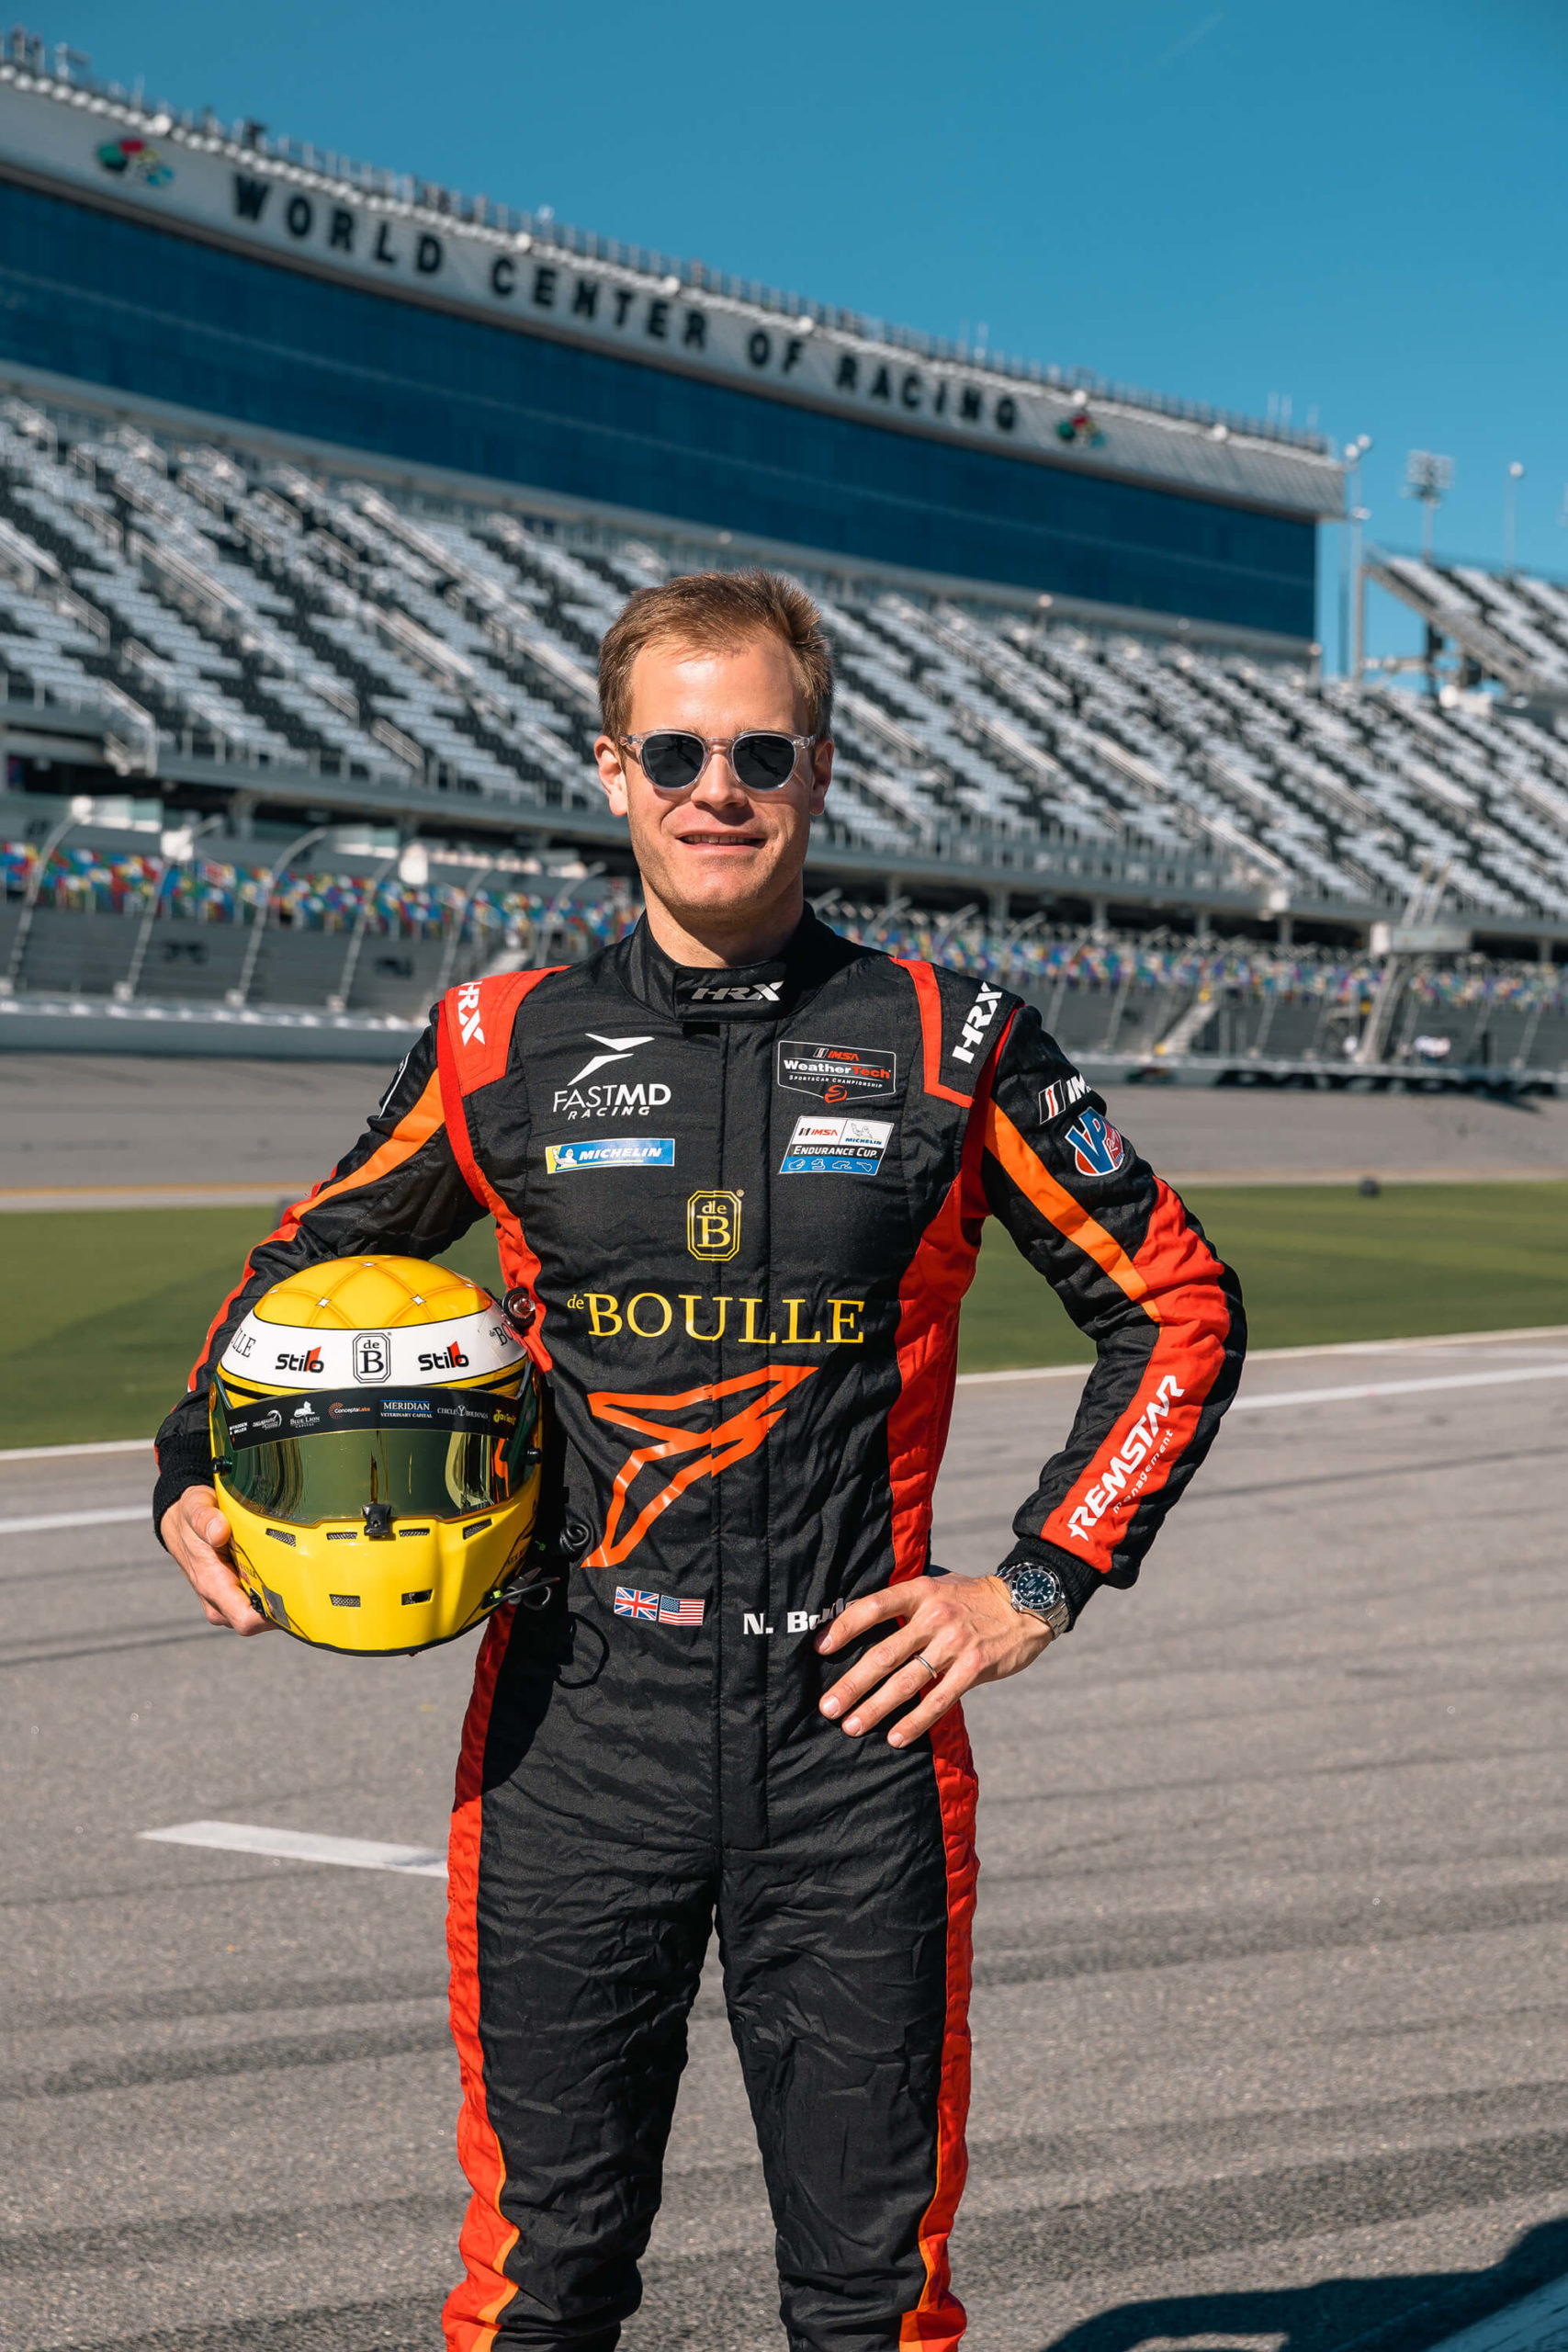 Nick Boulle Joins FASTMD Racing at the 2023 Rolex 24 Hours at Daytona Blog, Motorsports, News & Events, Uncategorized